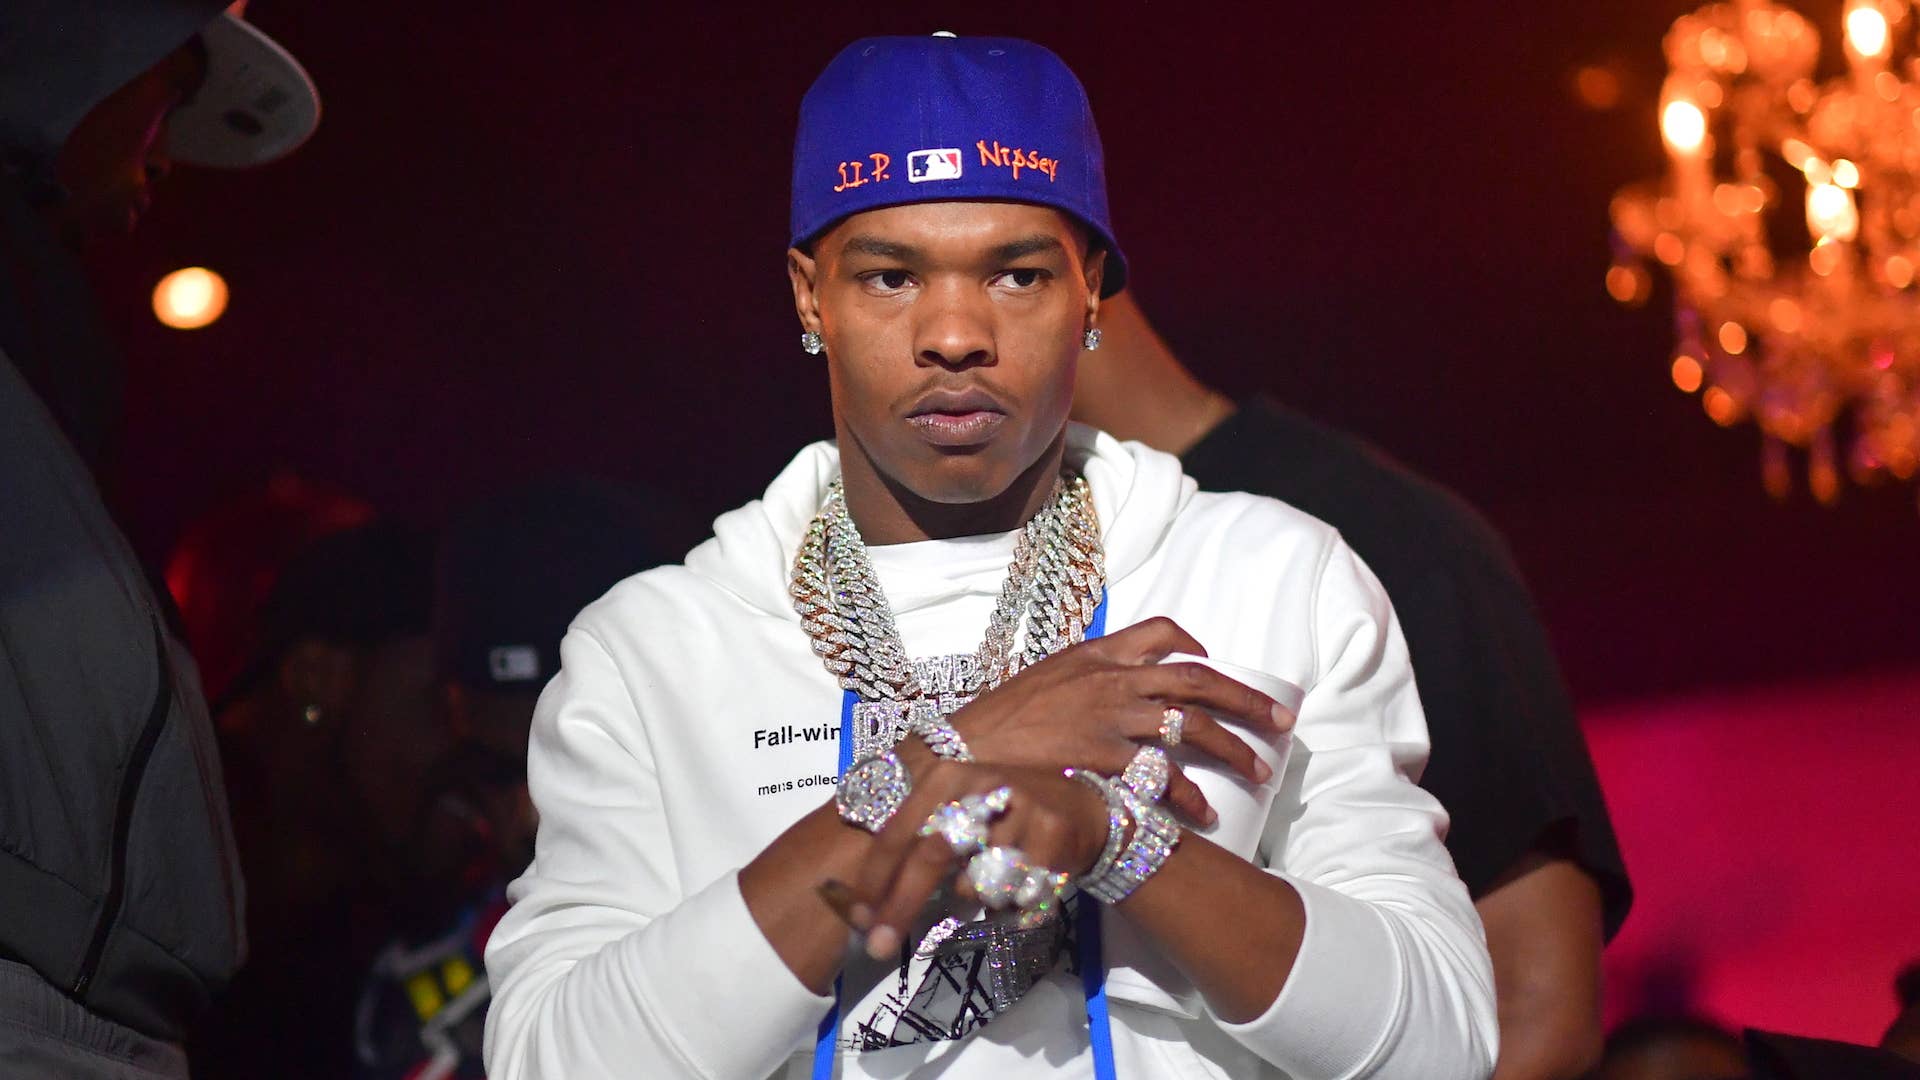 Lil Baby attends a Party Hosted by Gucci Mane at Compound.